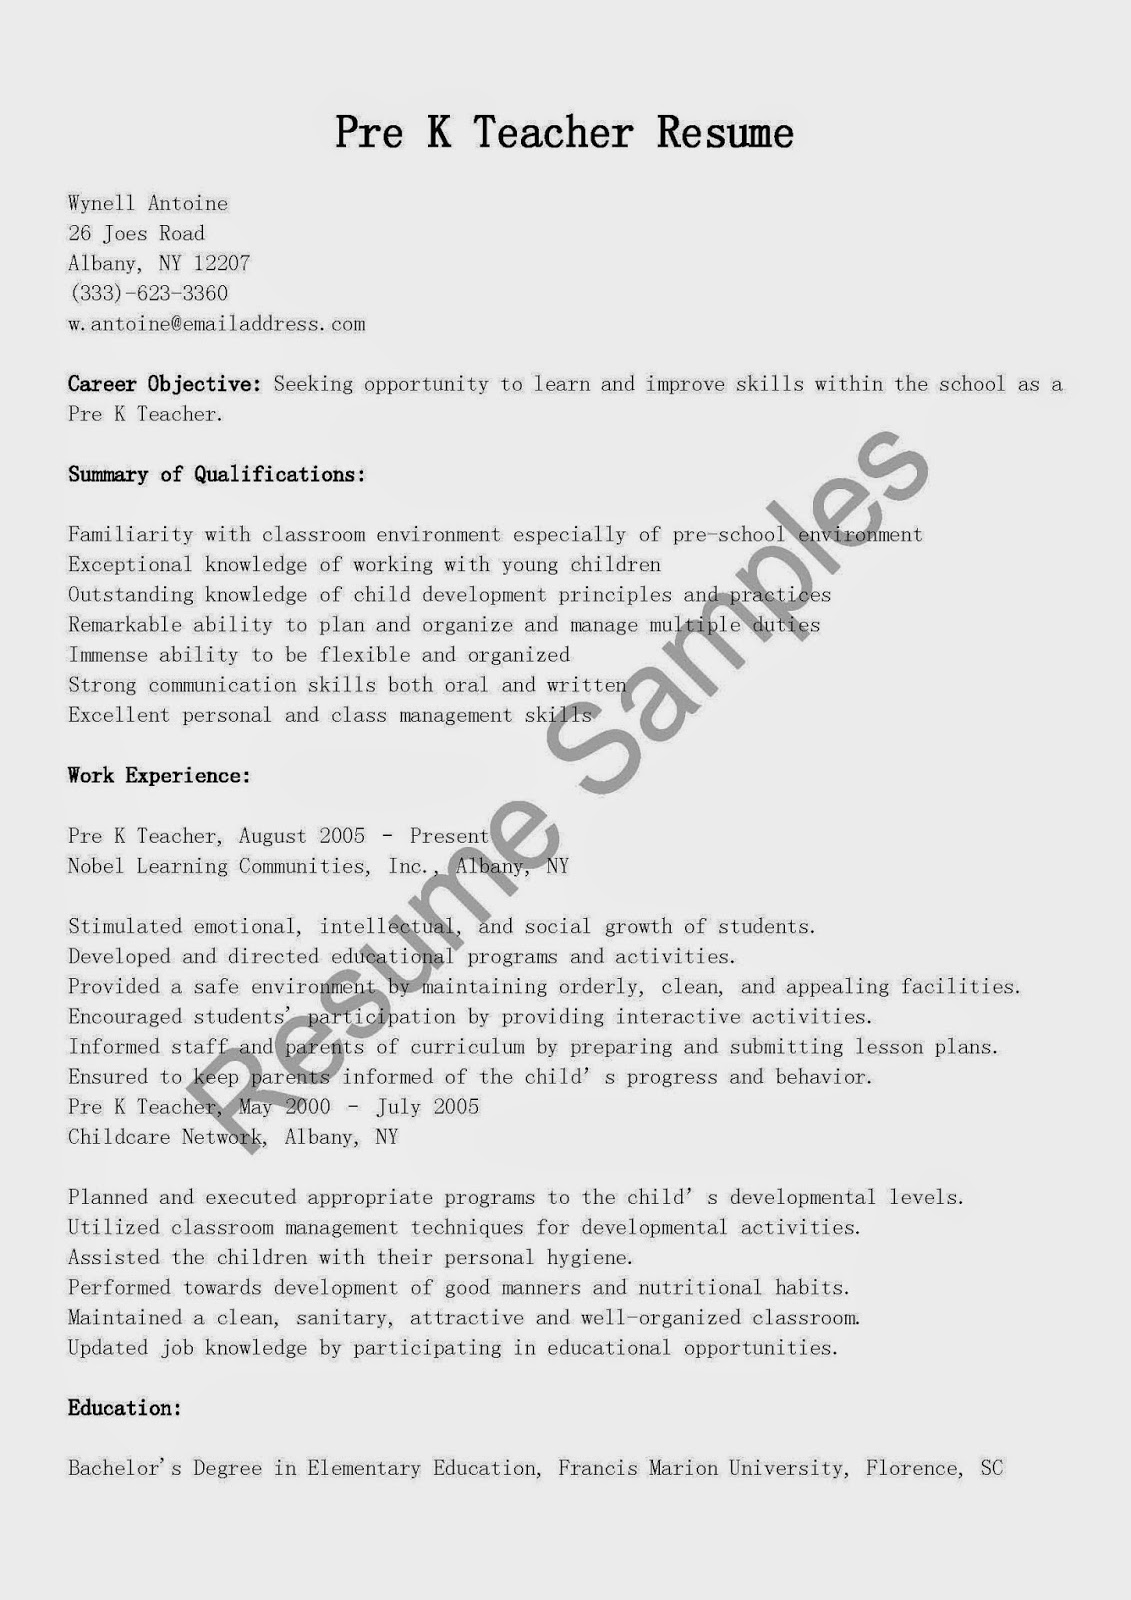 Perfered font resume